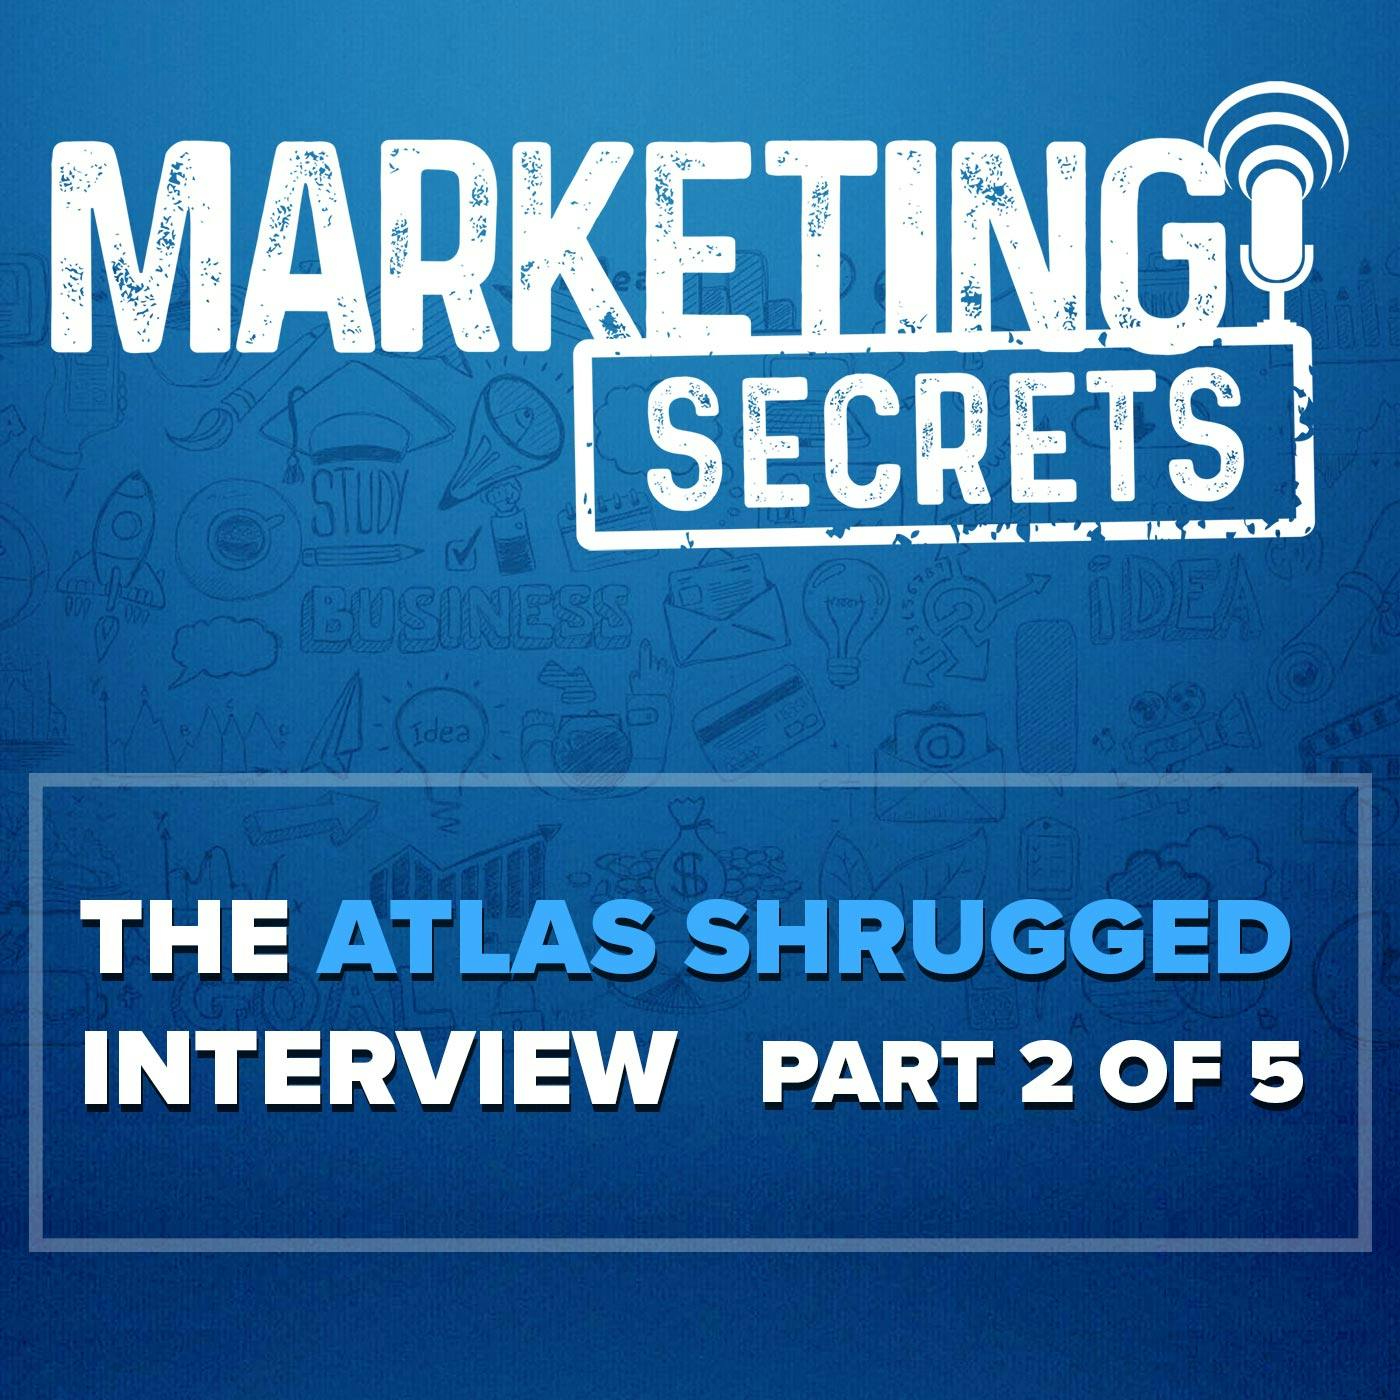 The Atlas Shrugged Interview - Part 2 of 5